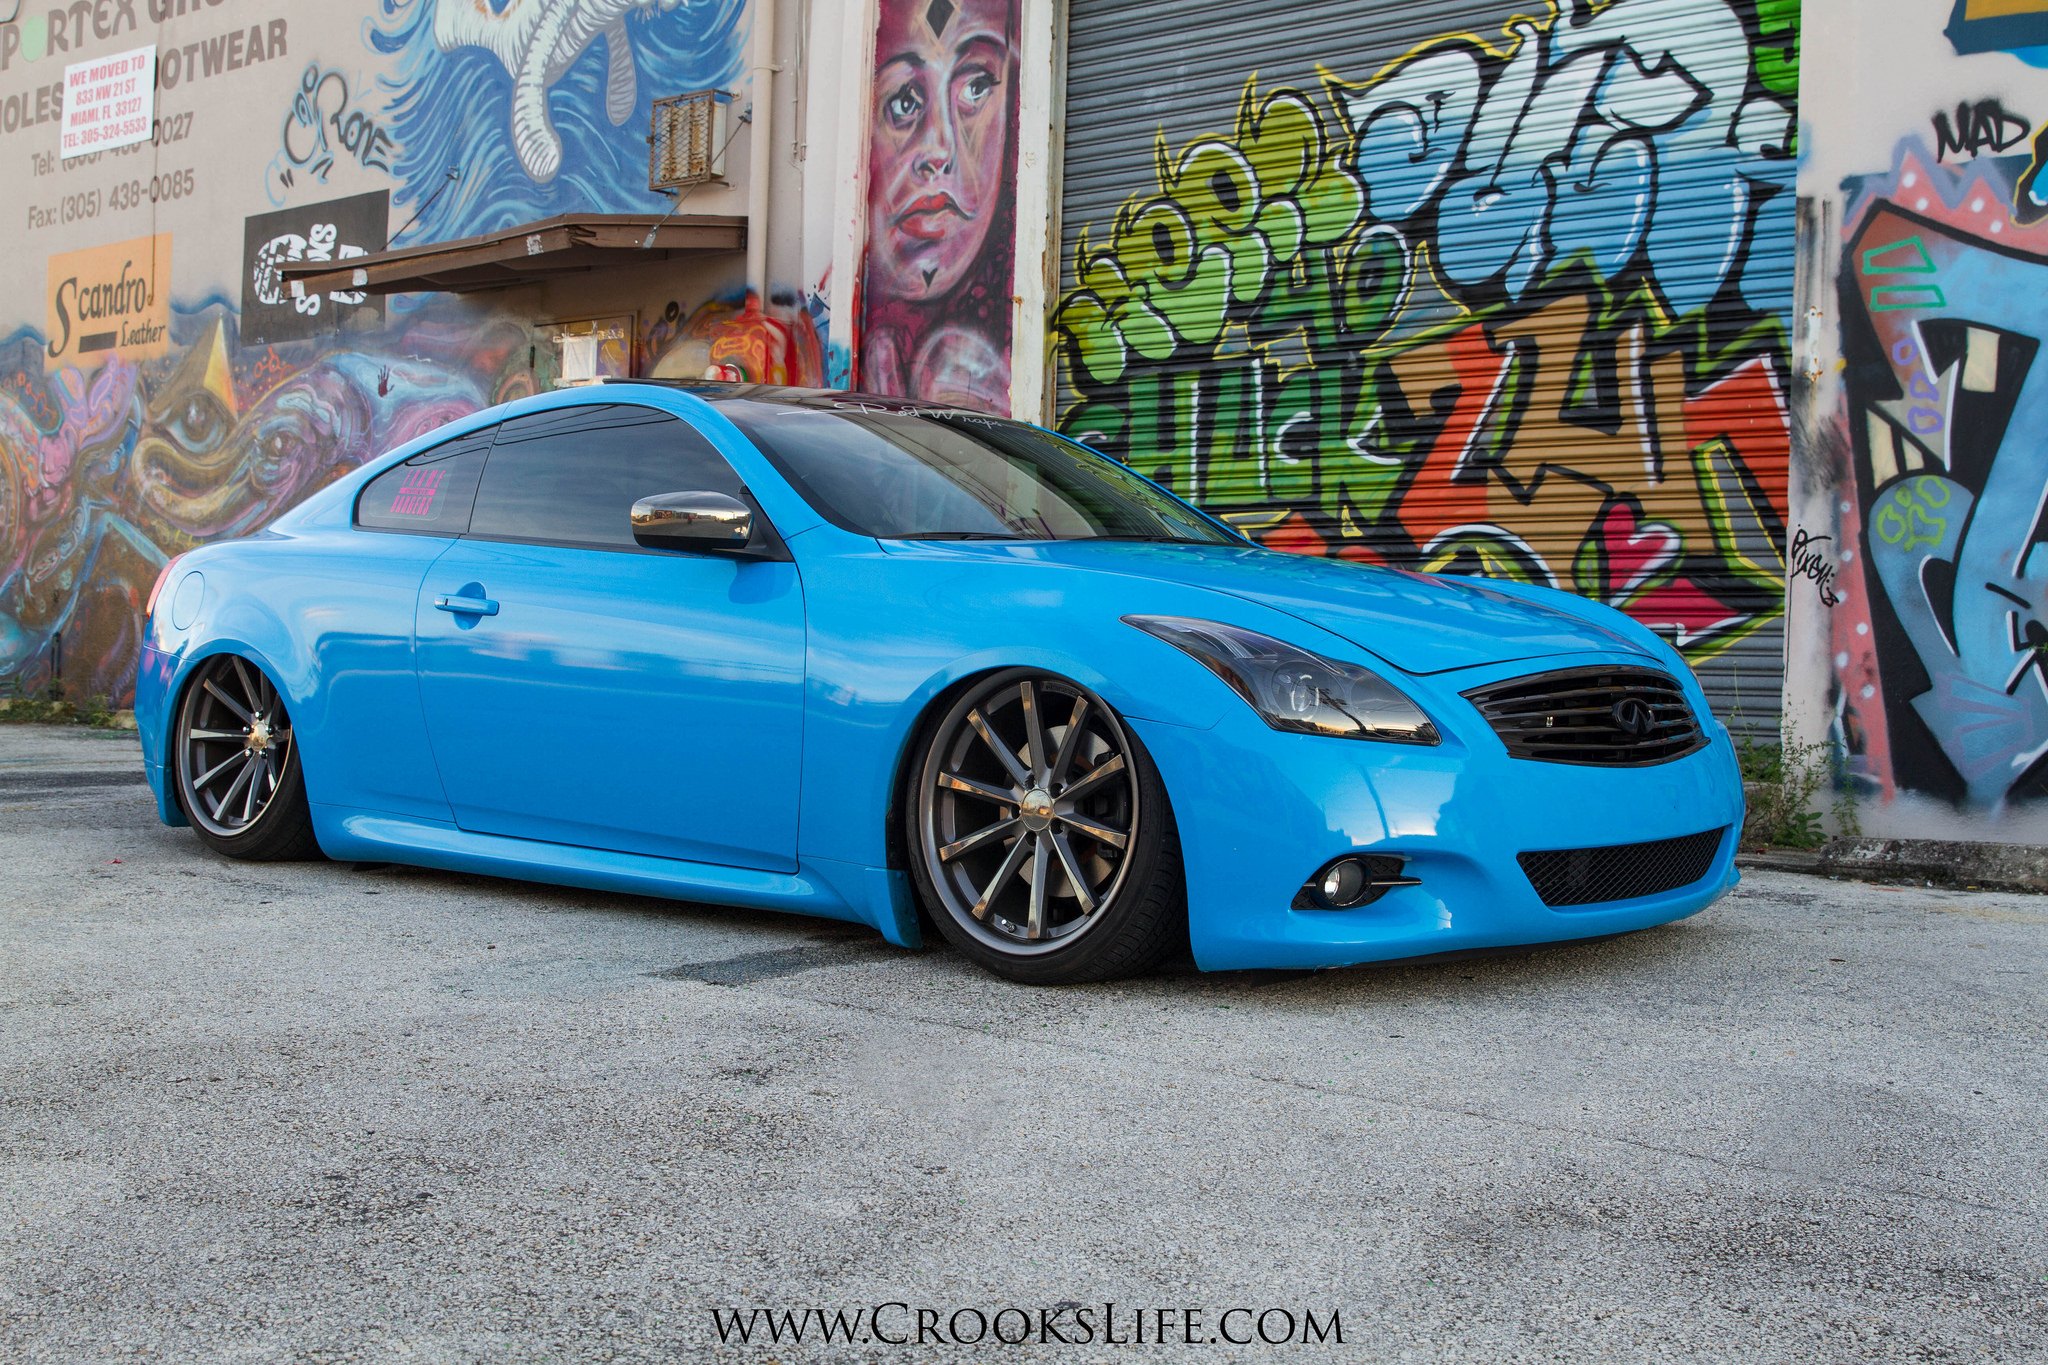 Blue Infiniti G37 with Blacked Out Billet Grille - Photo by Jimmy Crook